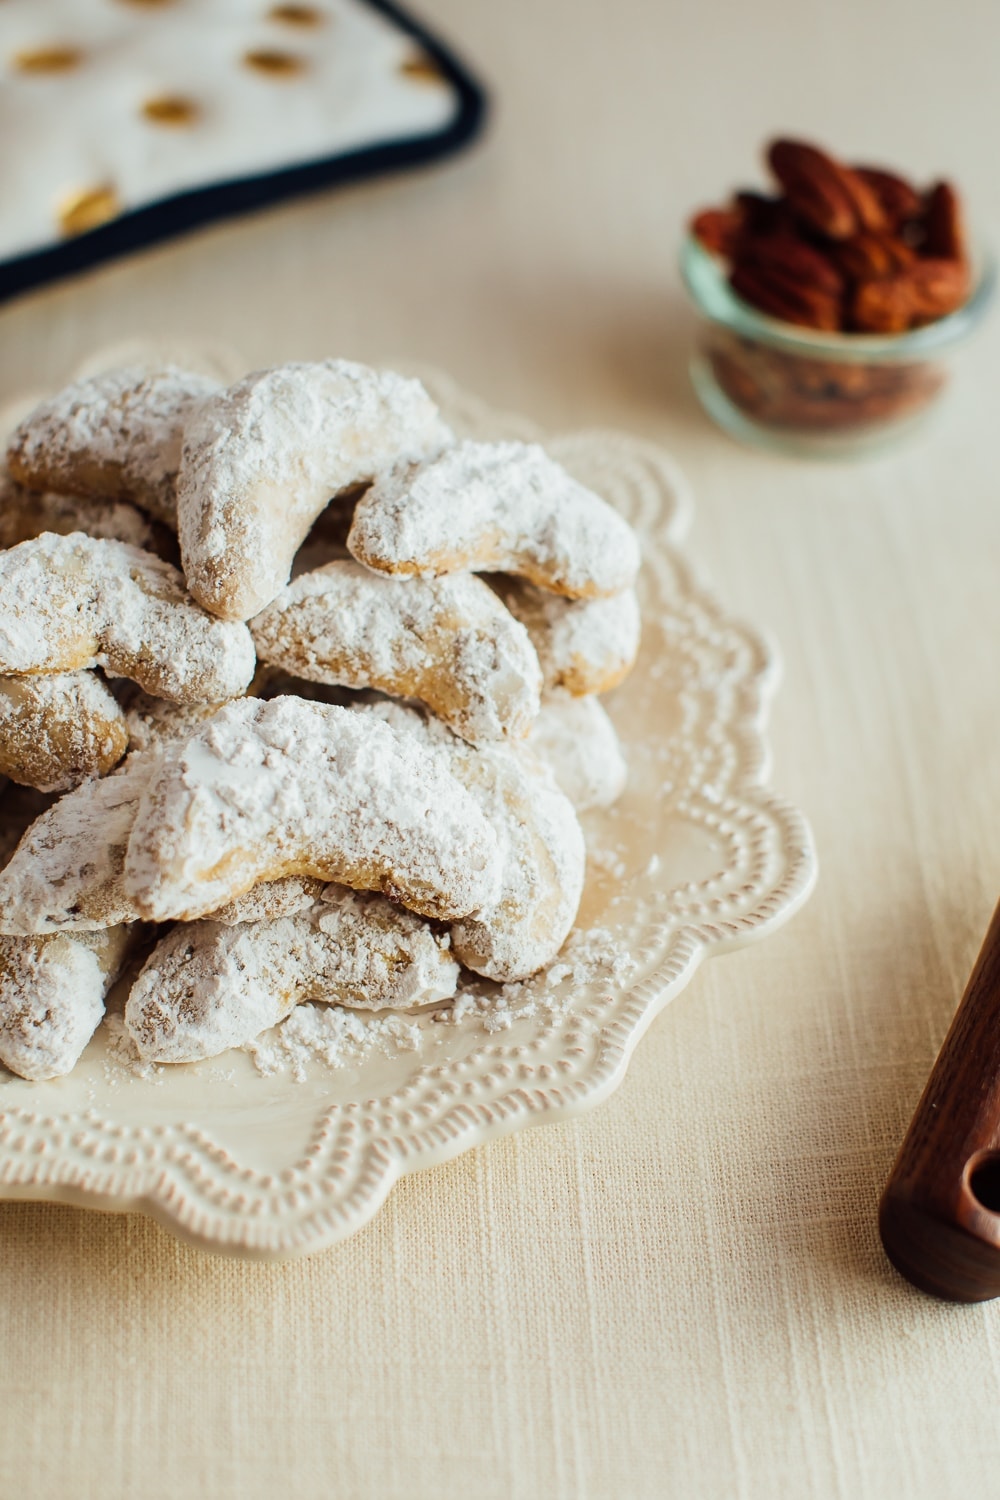 These simple almond flour crescent cookies are a healthy take on my Nanny’s signature crescent cookie recipe. They’re vegan + gluten-free and you only need six ingredients!